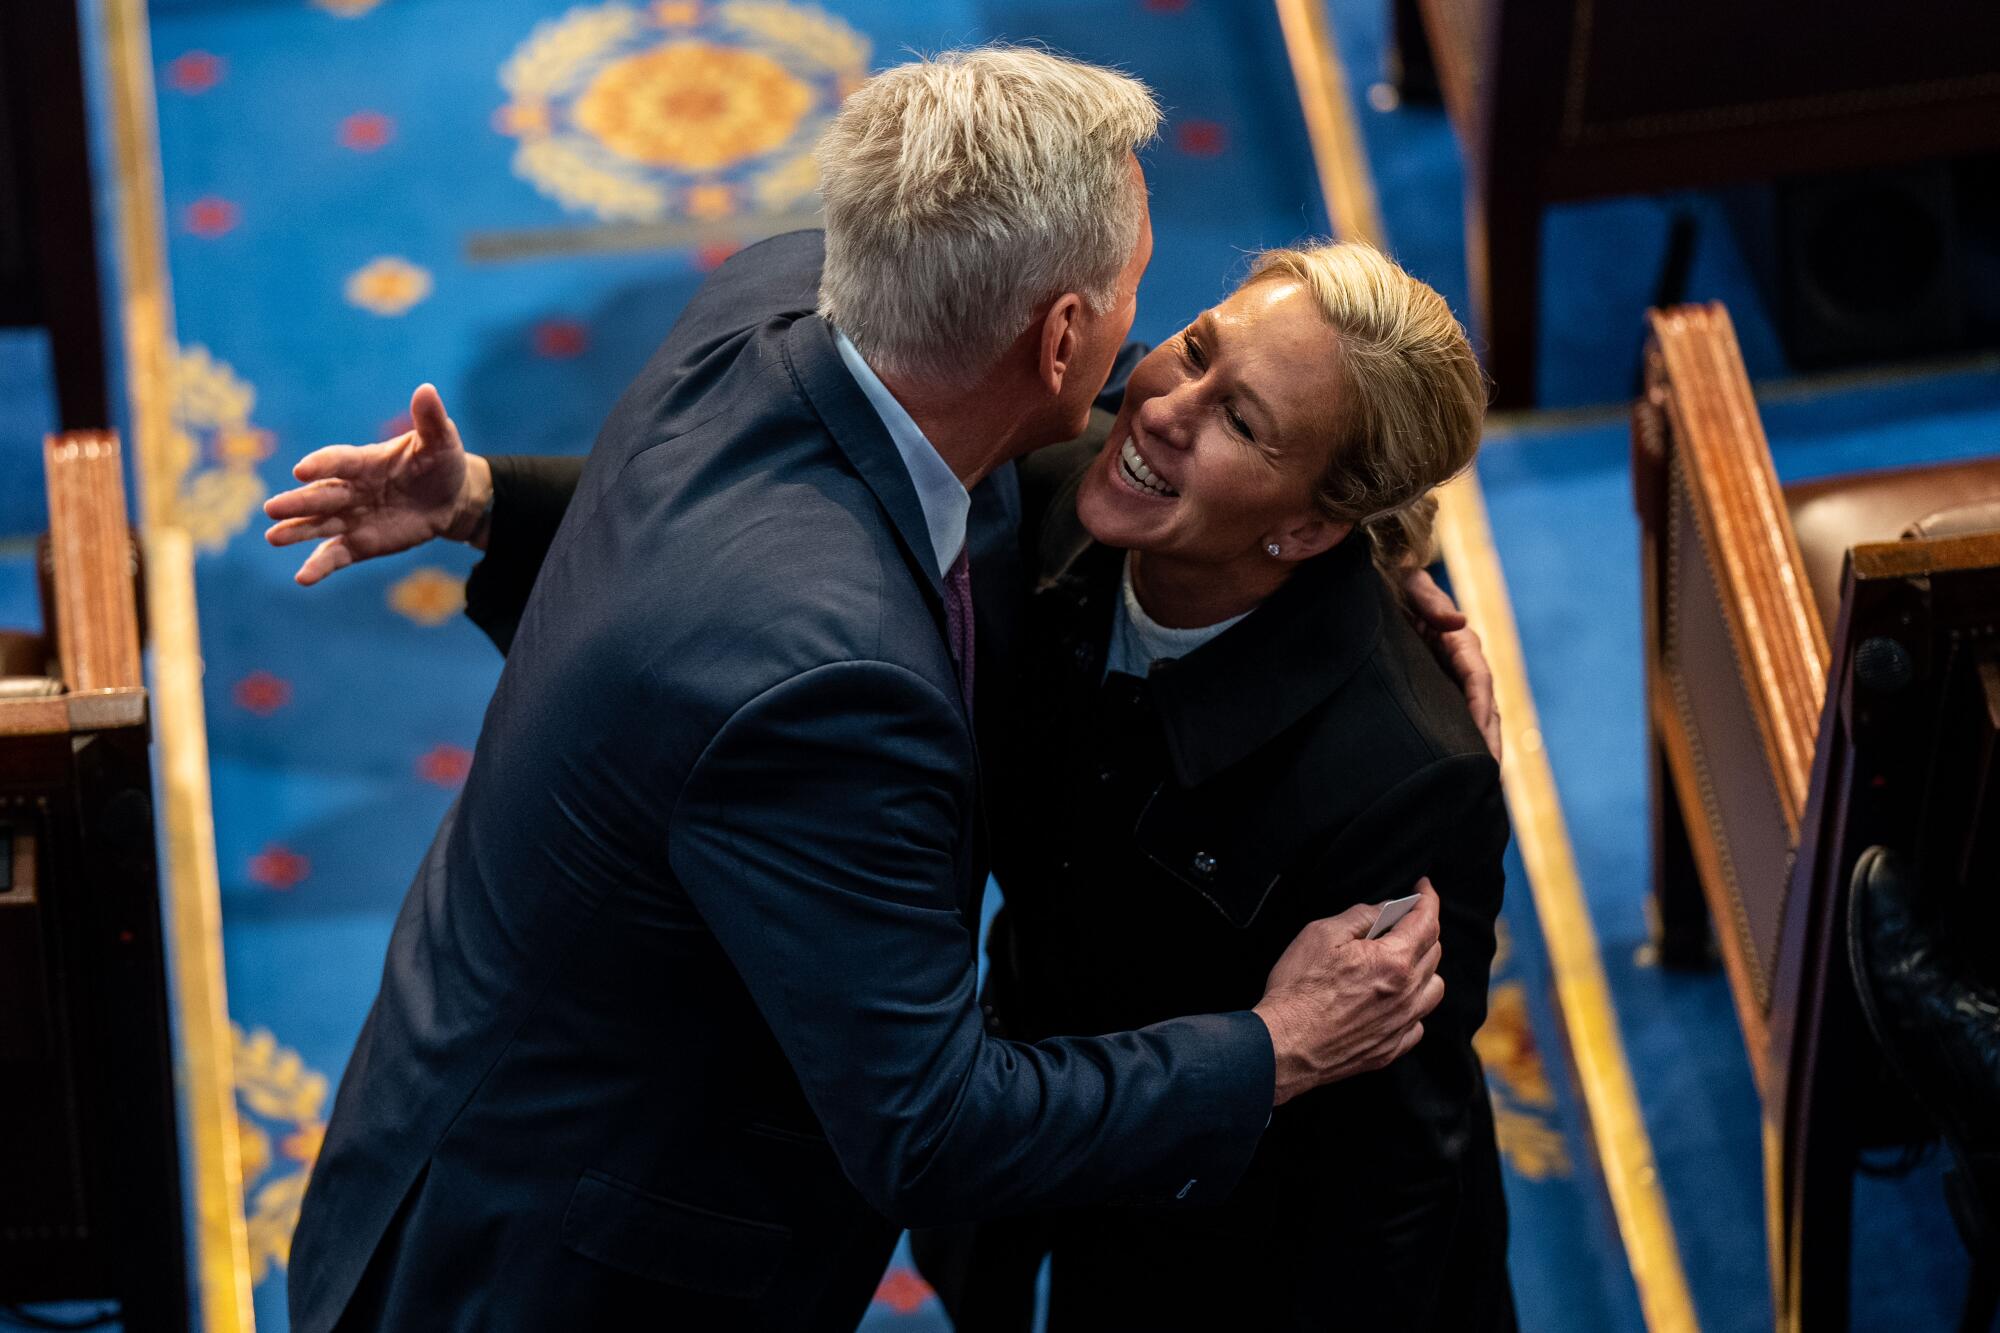  Kevin McCarthy hugs Rep. Marjorie Taylor Greene on the floor of the House